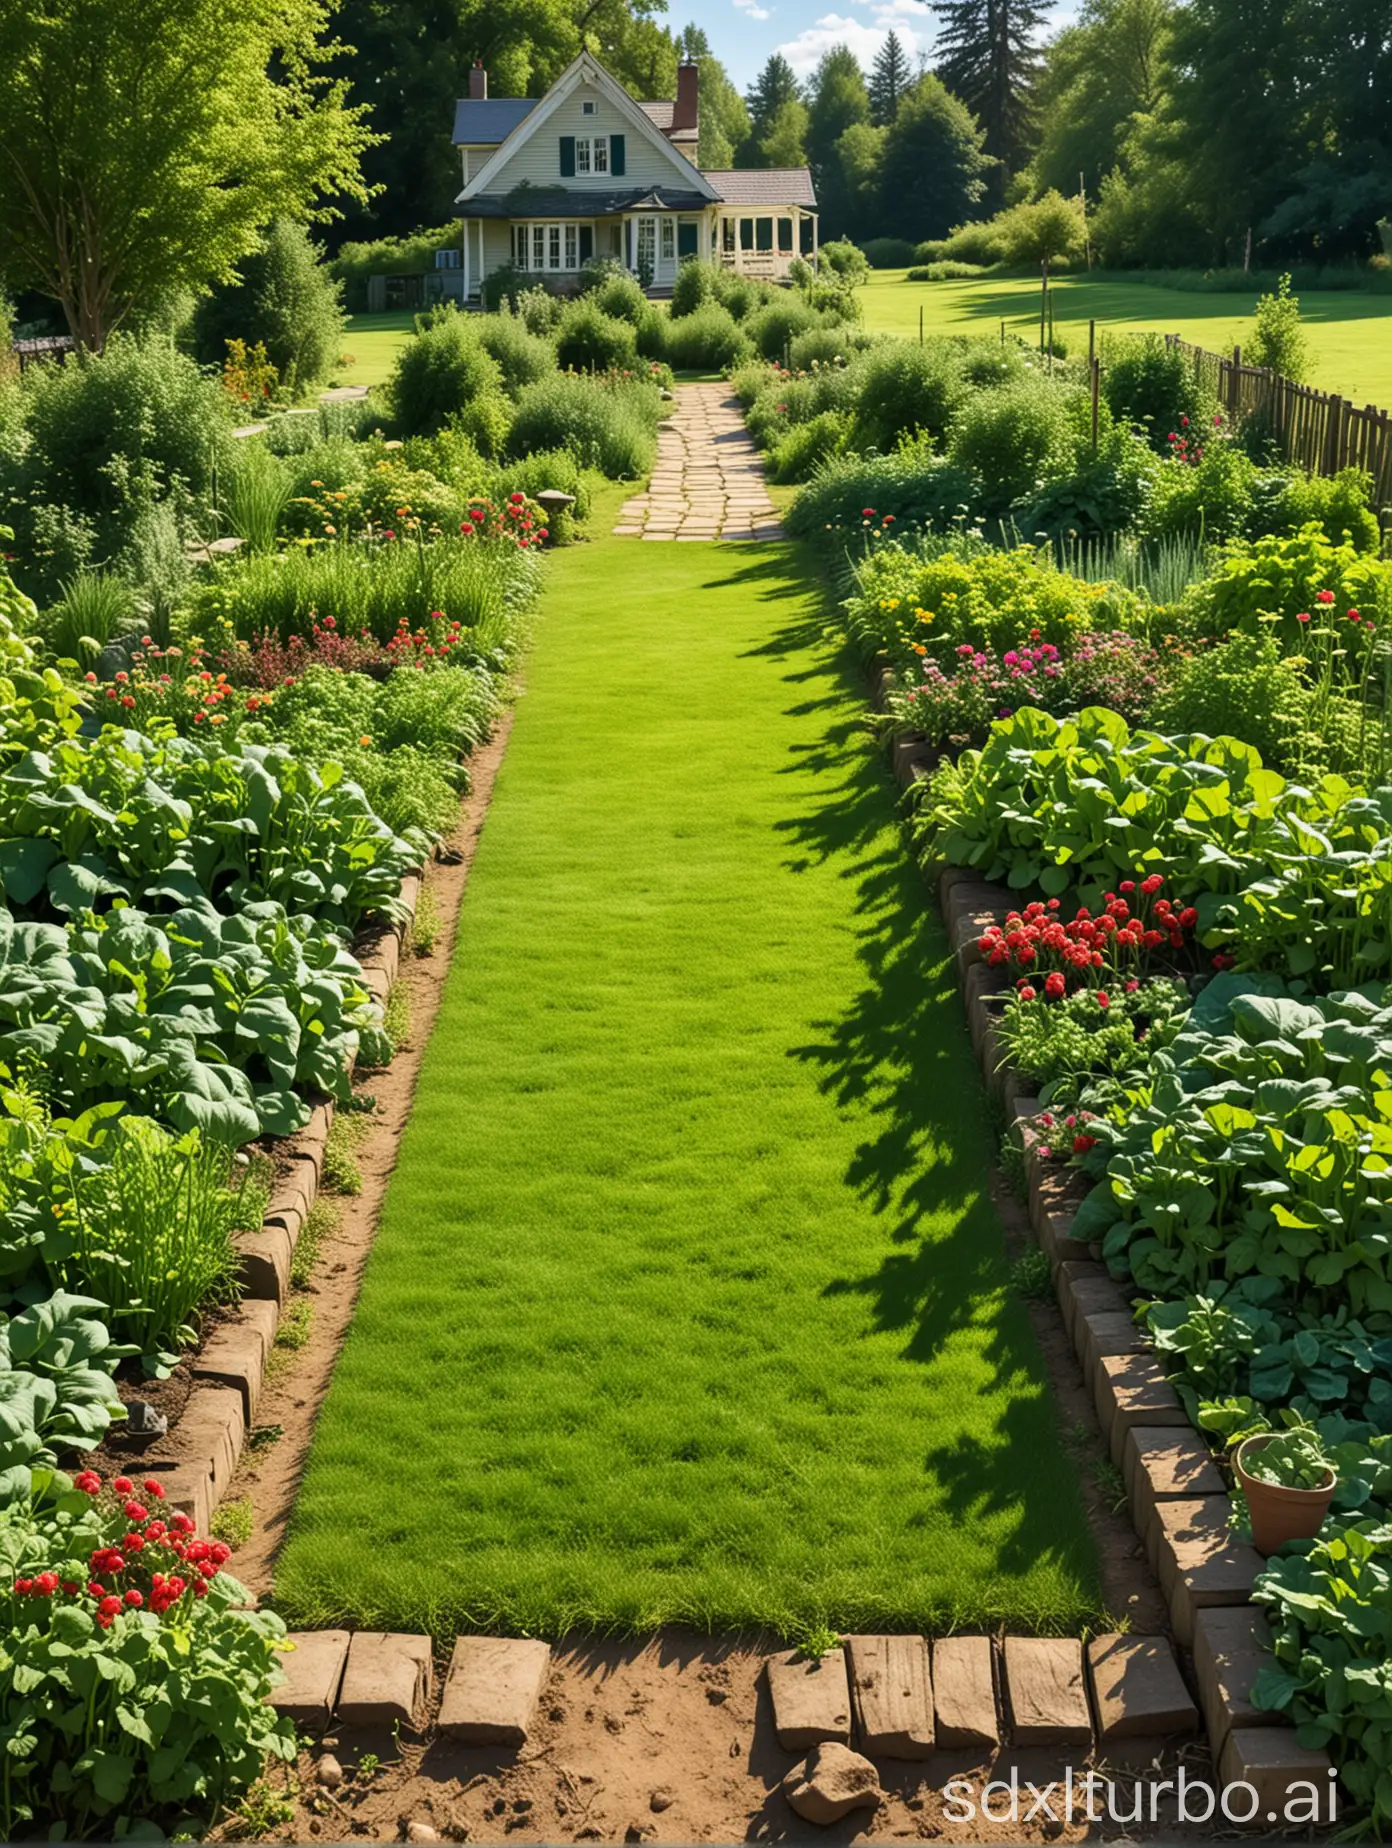 A GREEN LAWN, A SUNNY DAY, REALISM, A COUNTRY HOUSE, VEGETABLES GROW IN THE BEDS